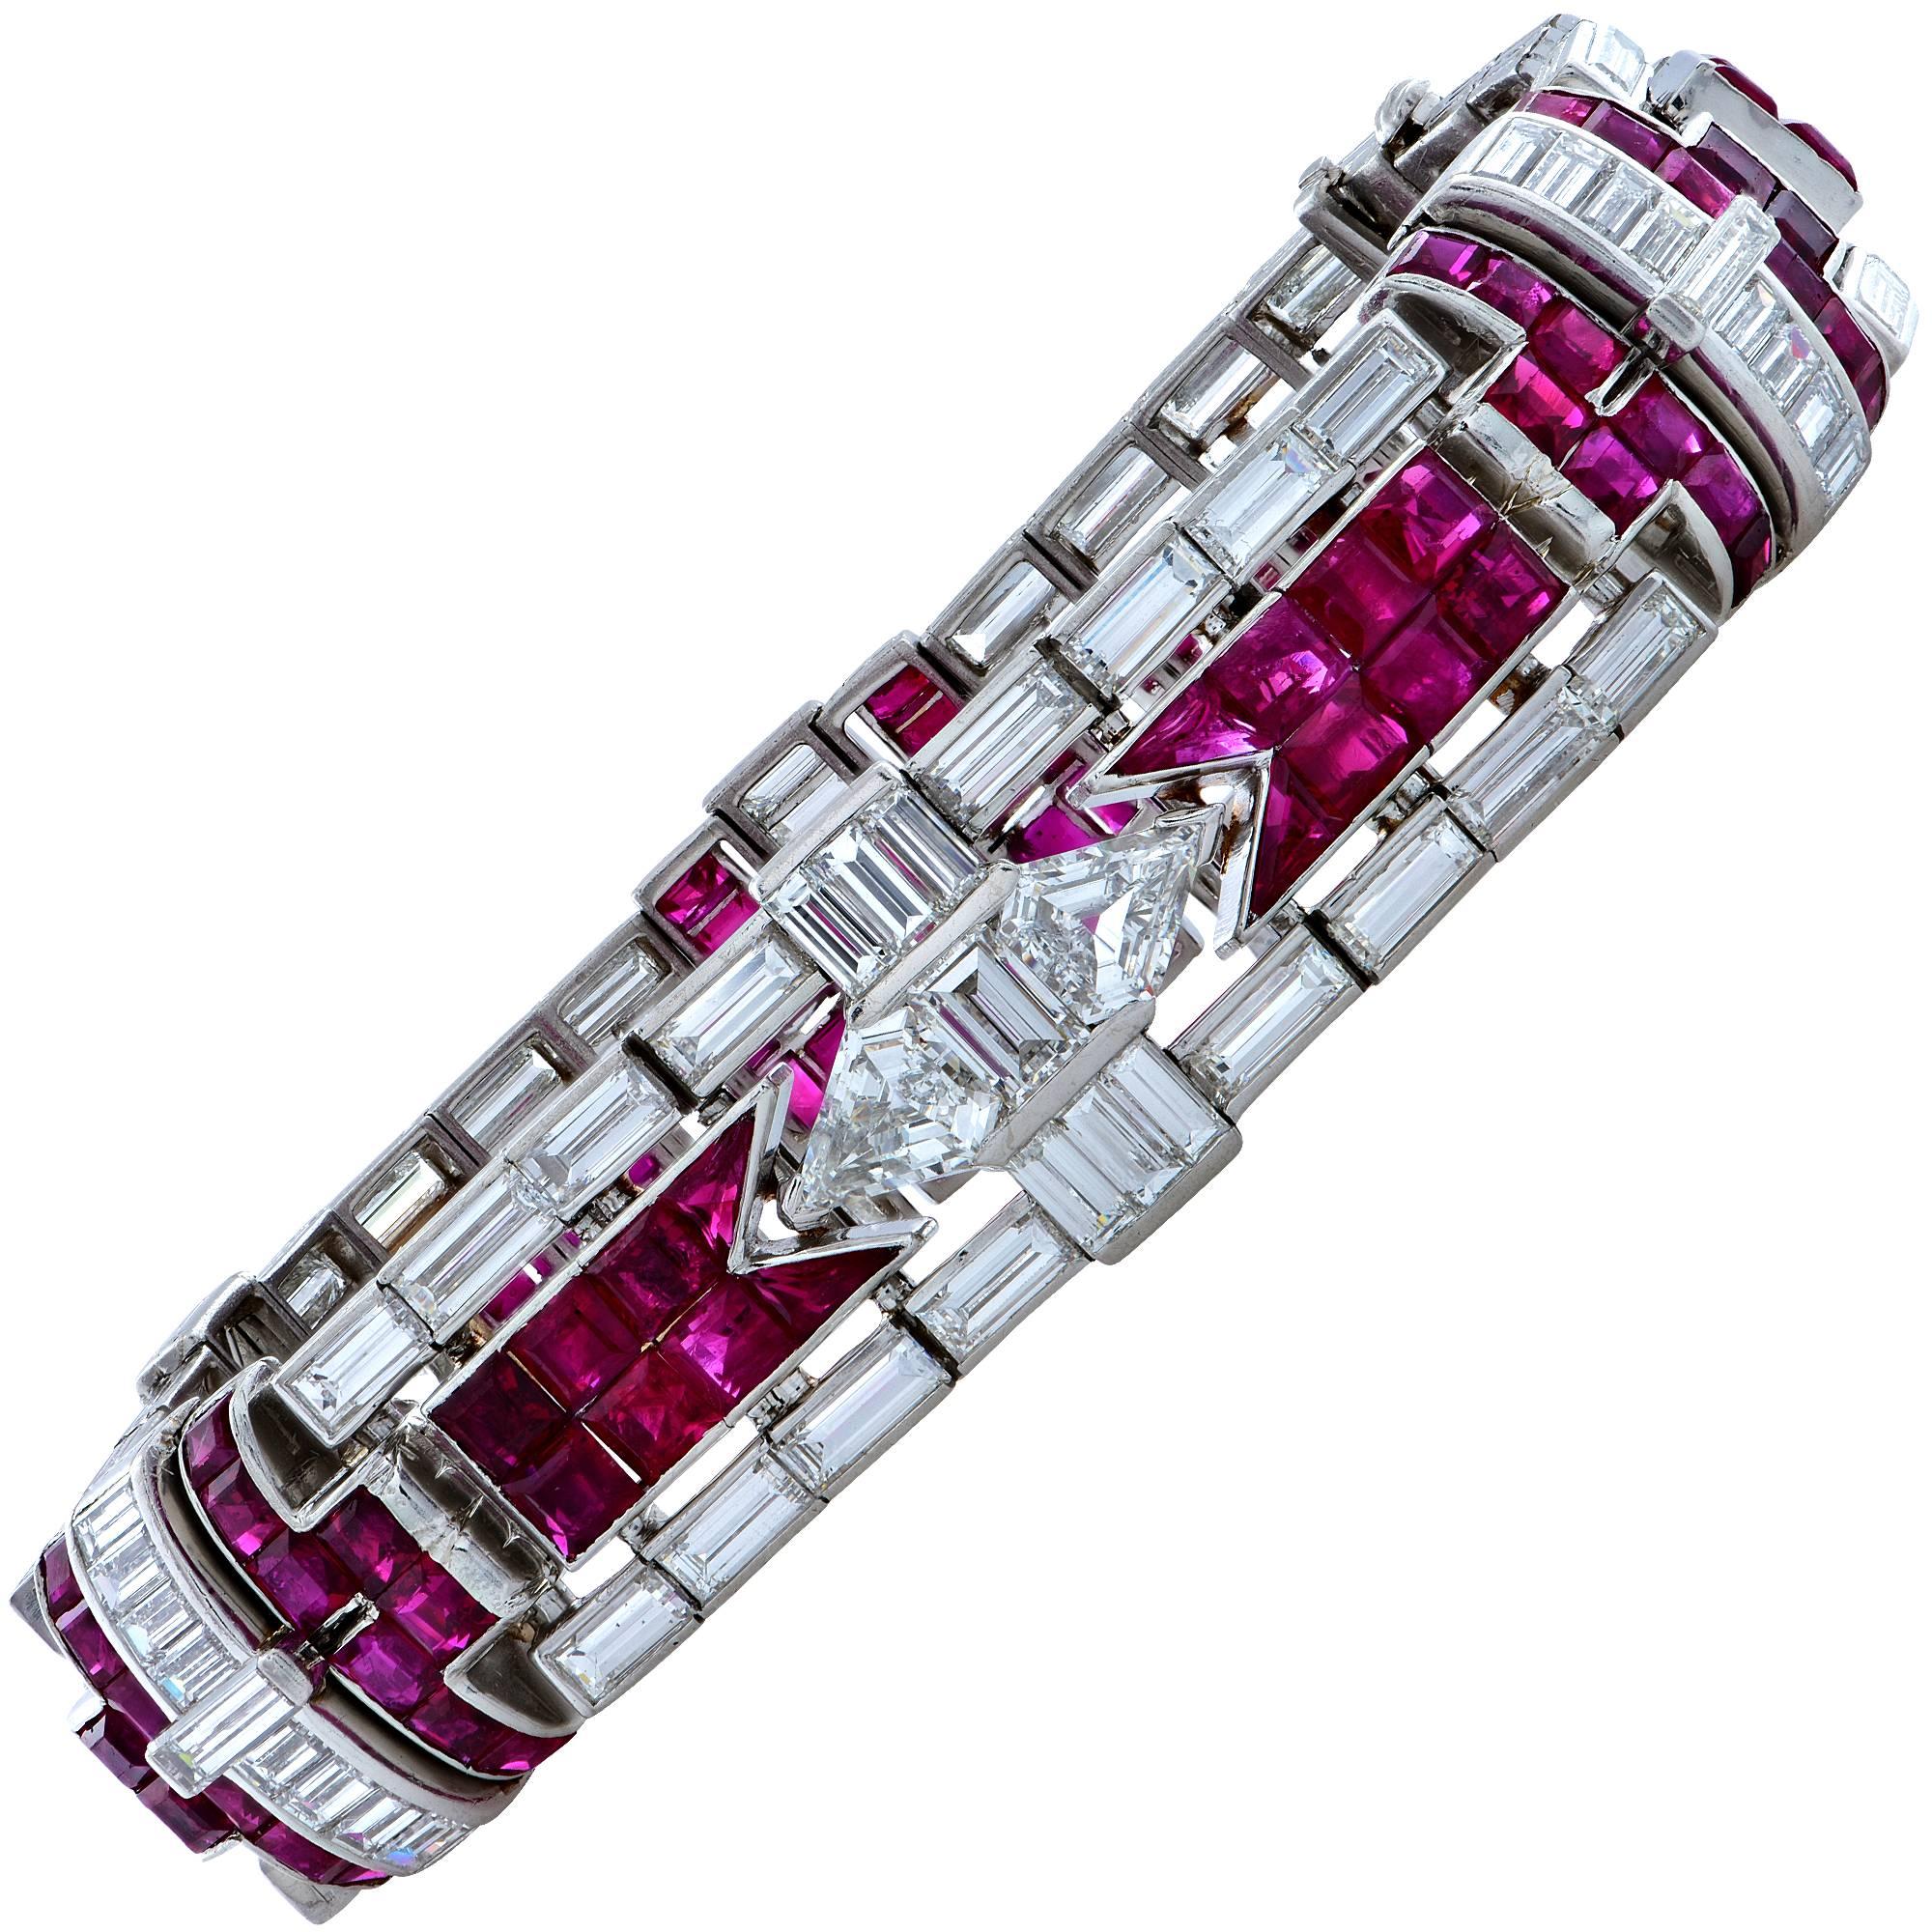 Platinum Art Deco bracelet stamped OCT.31-1922 featuring 96 Custom cut Rubies weighing approximately 22cts, the vast majority being unheated with a Burma origin. There are 94 straight baguette diamonds weighing approximately 18cts D-F color and